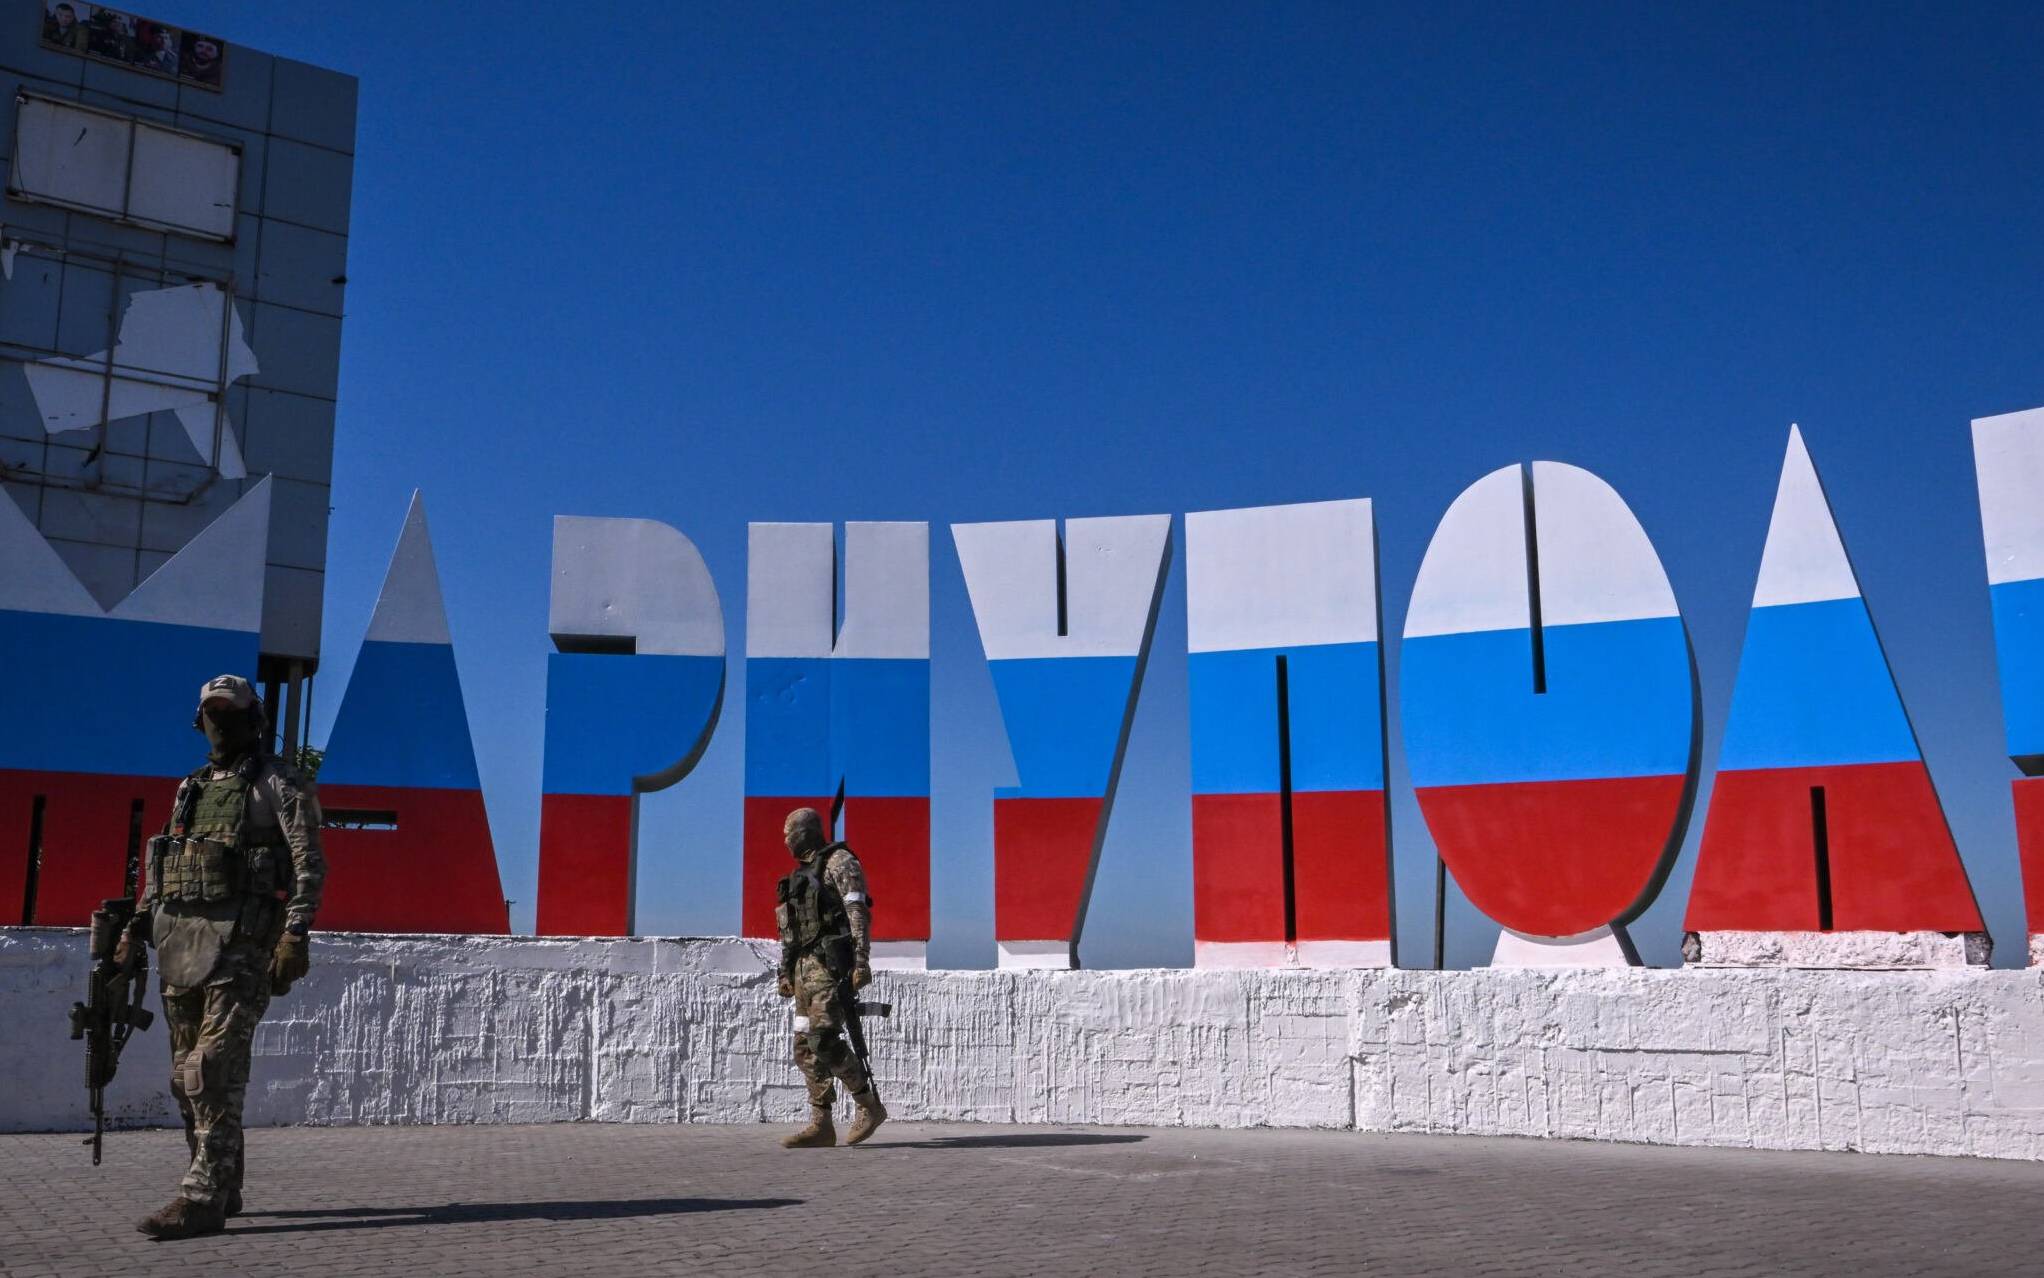 Russian servicemen walk near the welcome sign "Mariupol", which has been painted in Russian flag colours, at the entrance of Mariupol on June 12, 2022, amid the ongoing Russian military action in Ukraine. (Photo by Yuri KADOBNOV / AFP)